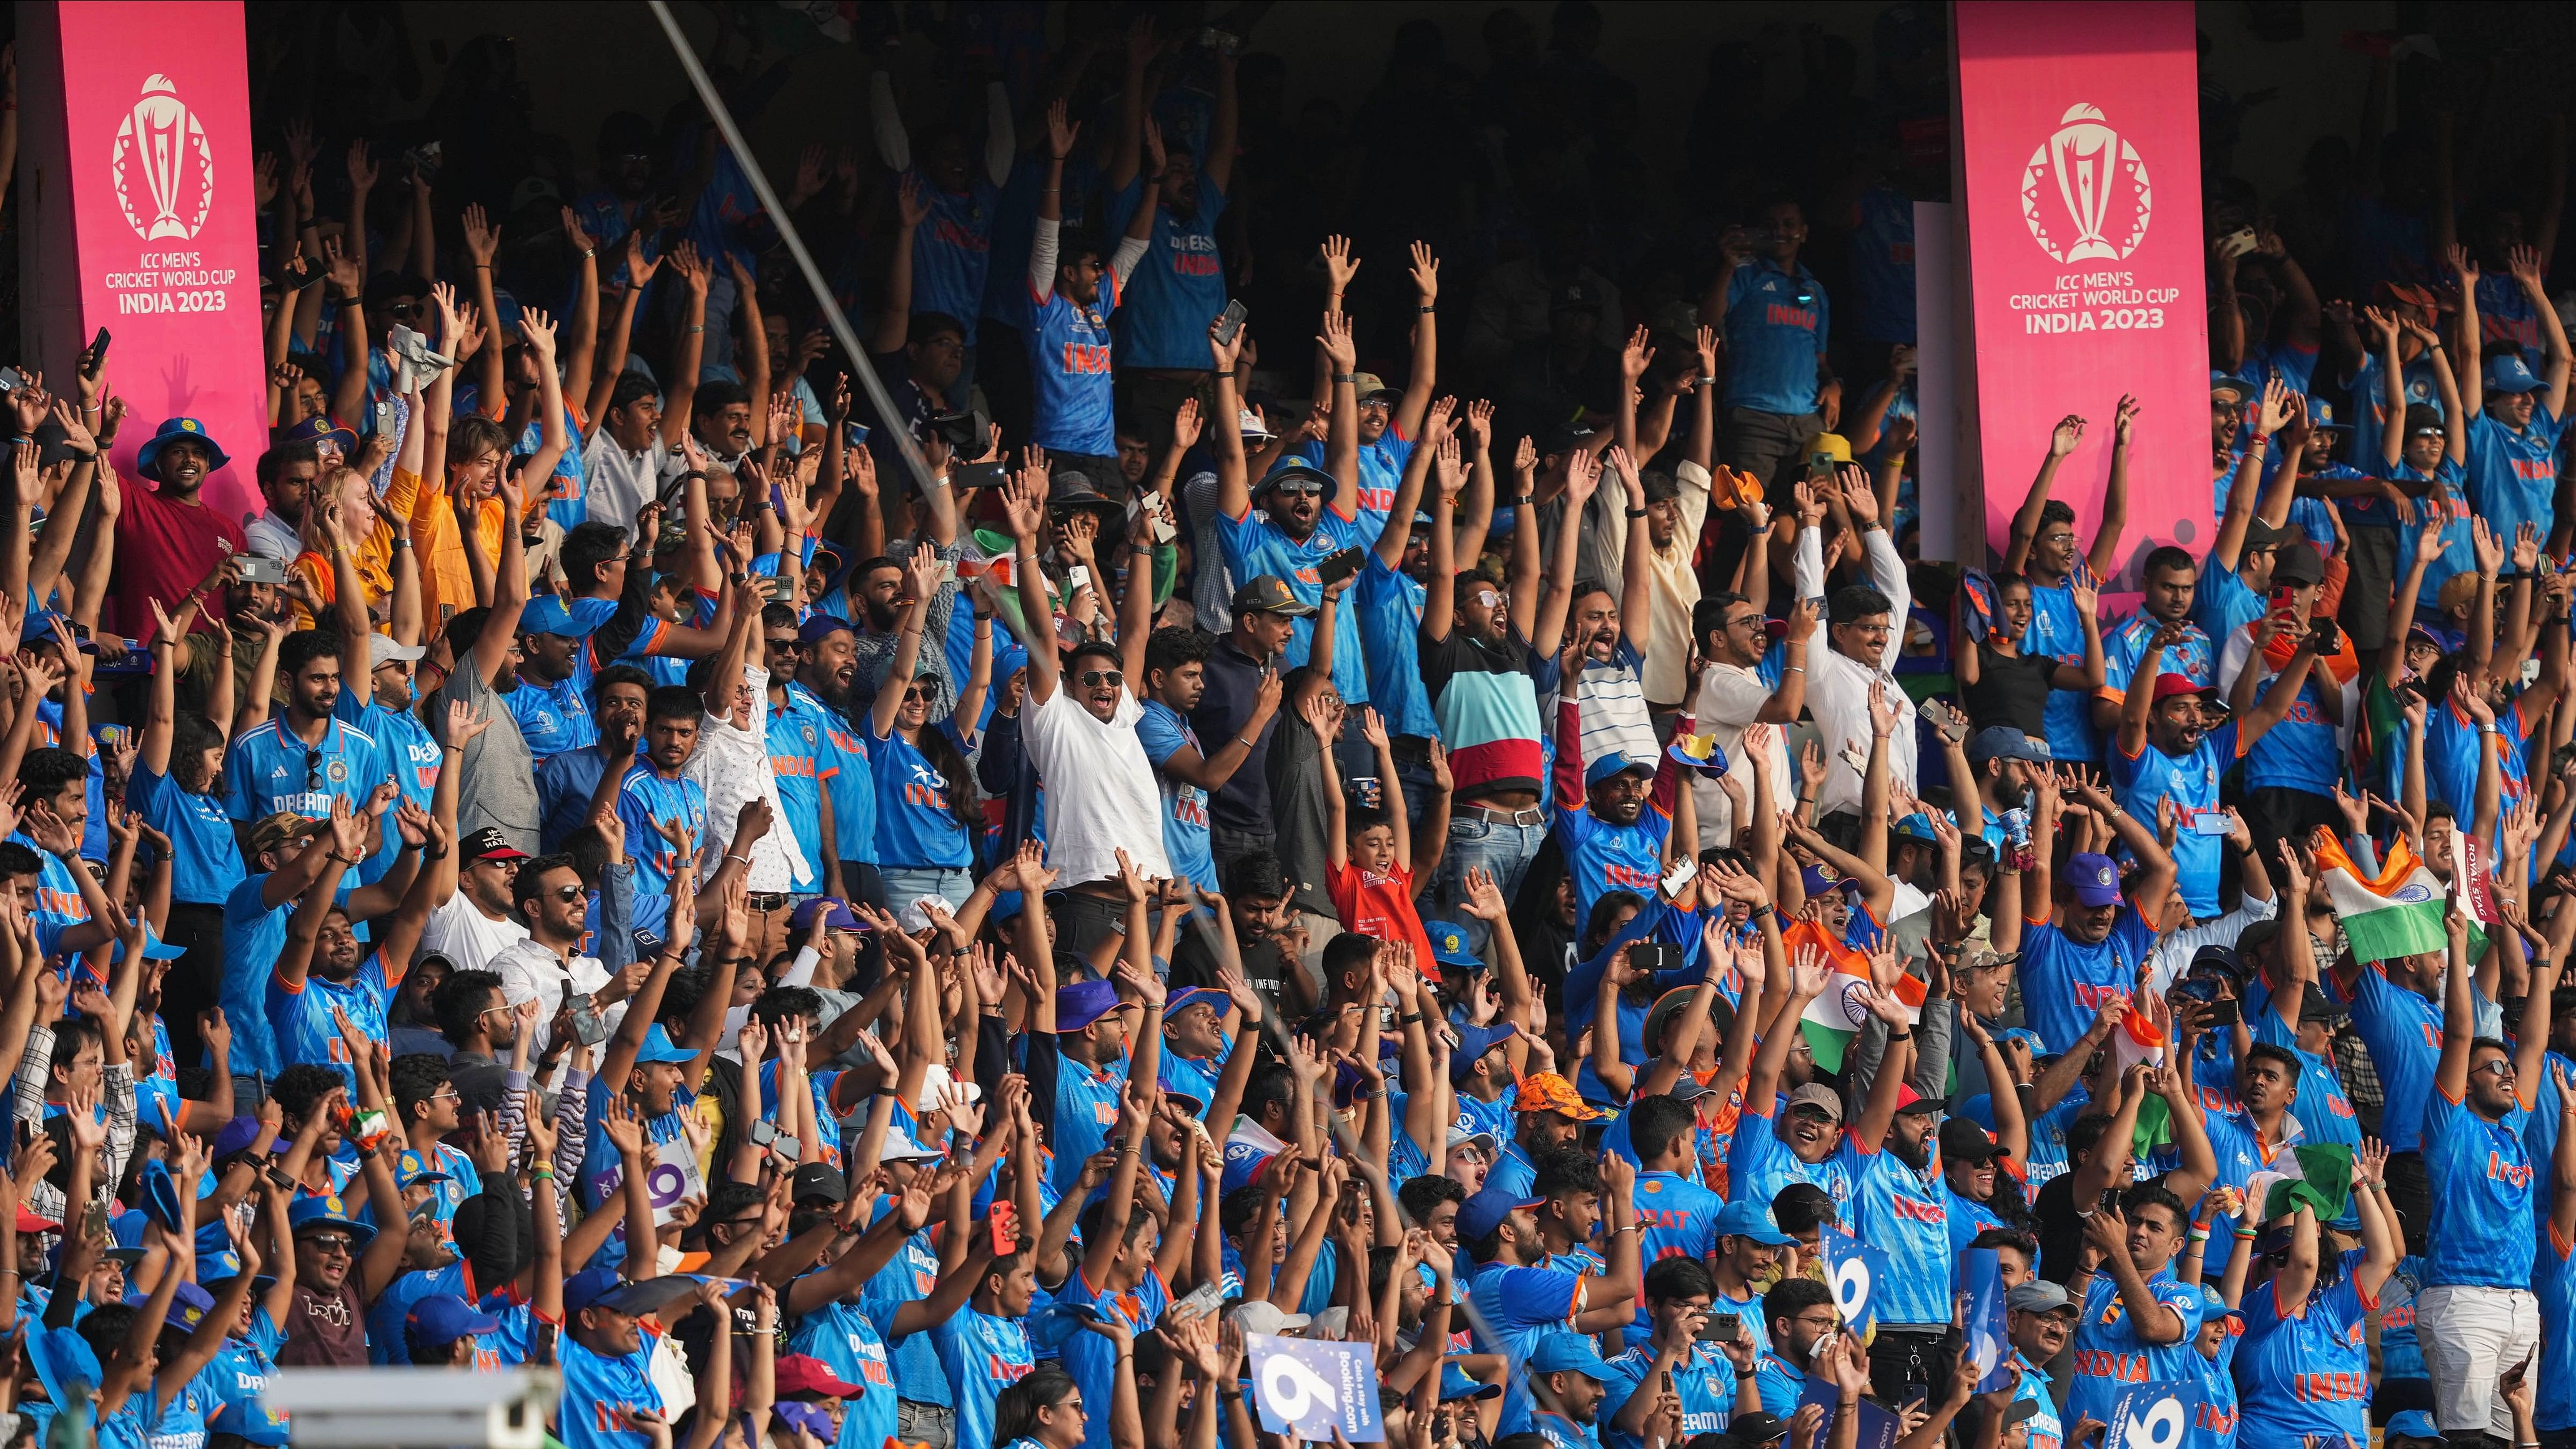 <div class="paragraphs"><p>Spectators during the ICC Men's Cricket World Cup 2023 match between India and Netherlands, at M Chinnaswamy Stadium in Bengaluru.</p></div>